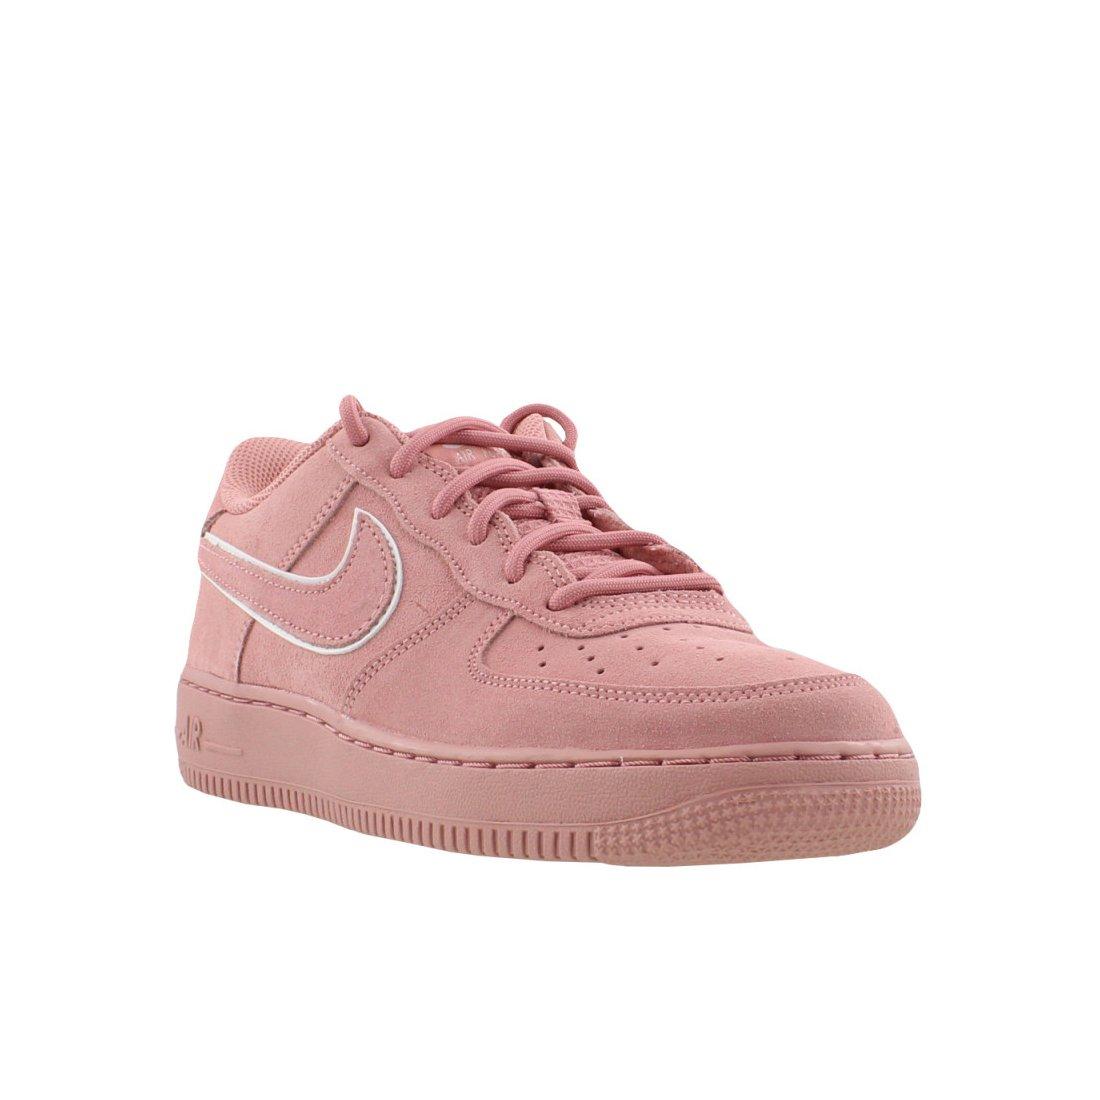 air force one pink suede